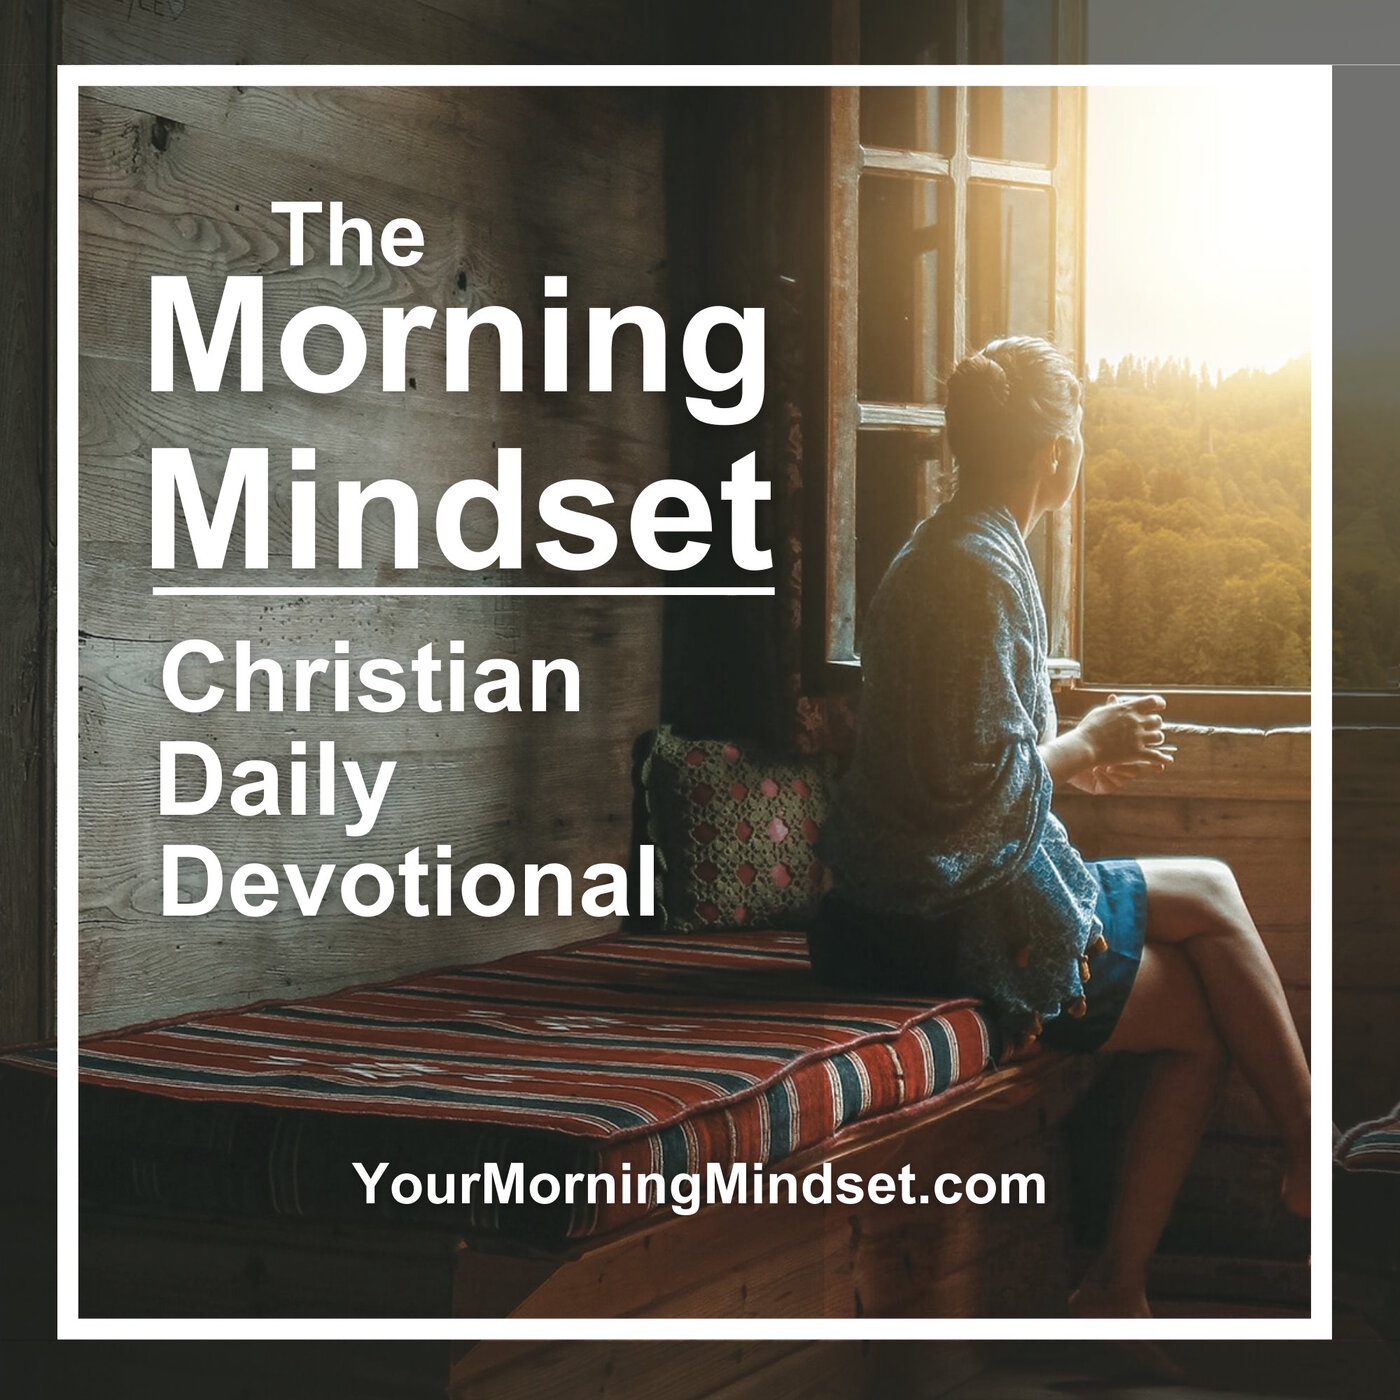 Morning Mindset Christian Daily Devotional Bible study and prayer podcast show image